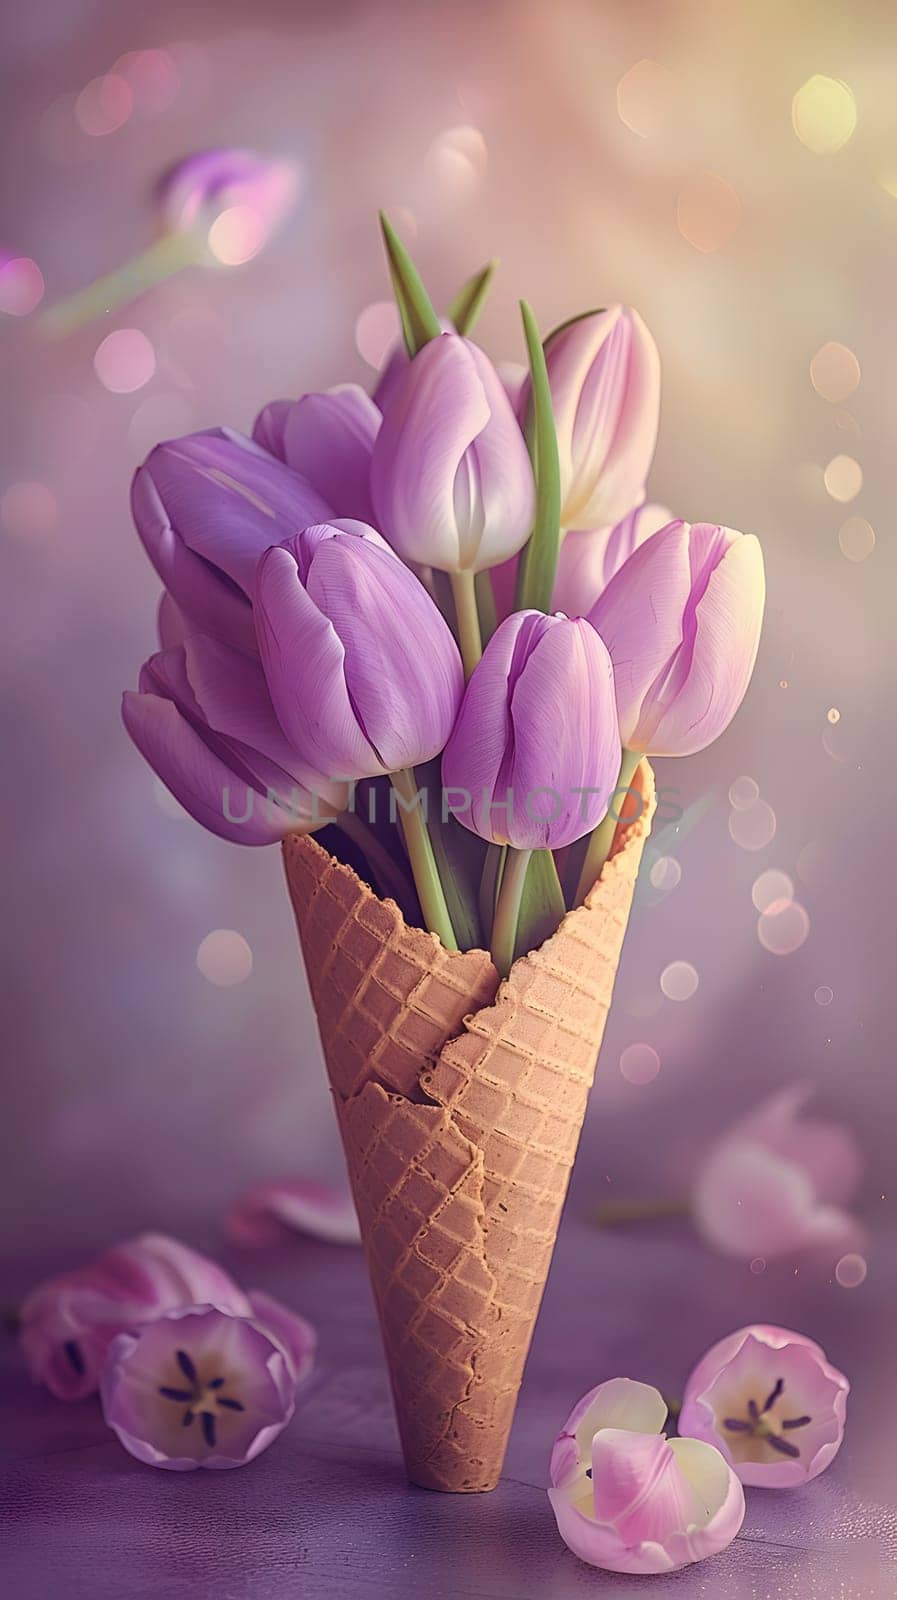 Flower bouquet of purple tulips in an ice cream cone by Nadtochiy